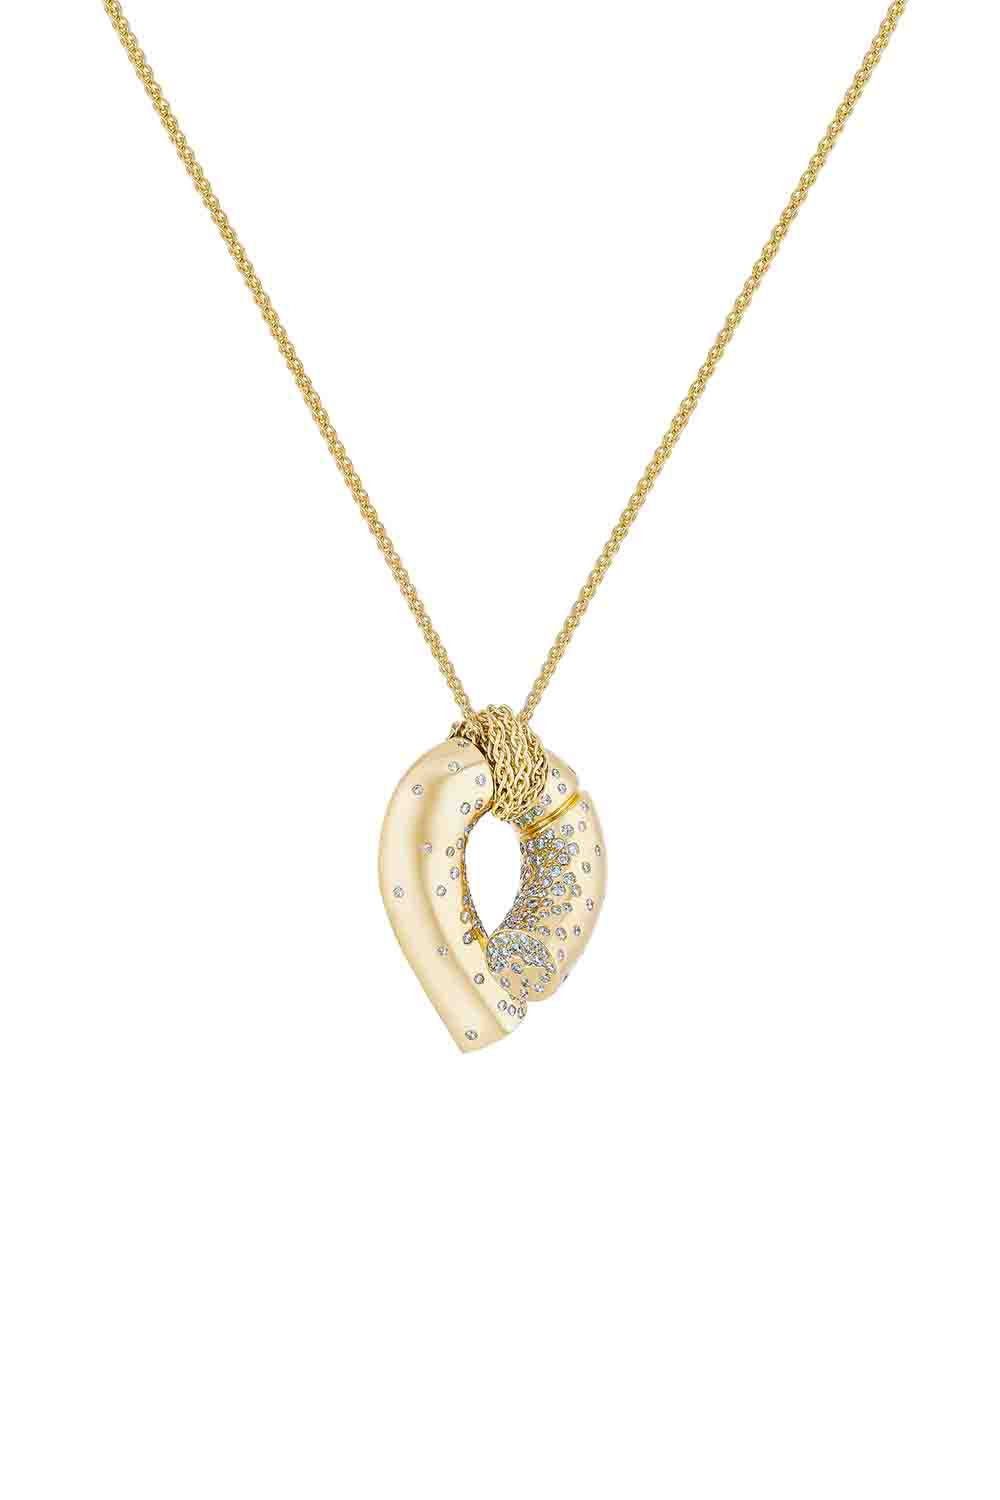 TABAYER-Oera Large Pendant Necklace-YELLOW GOLD